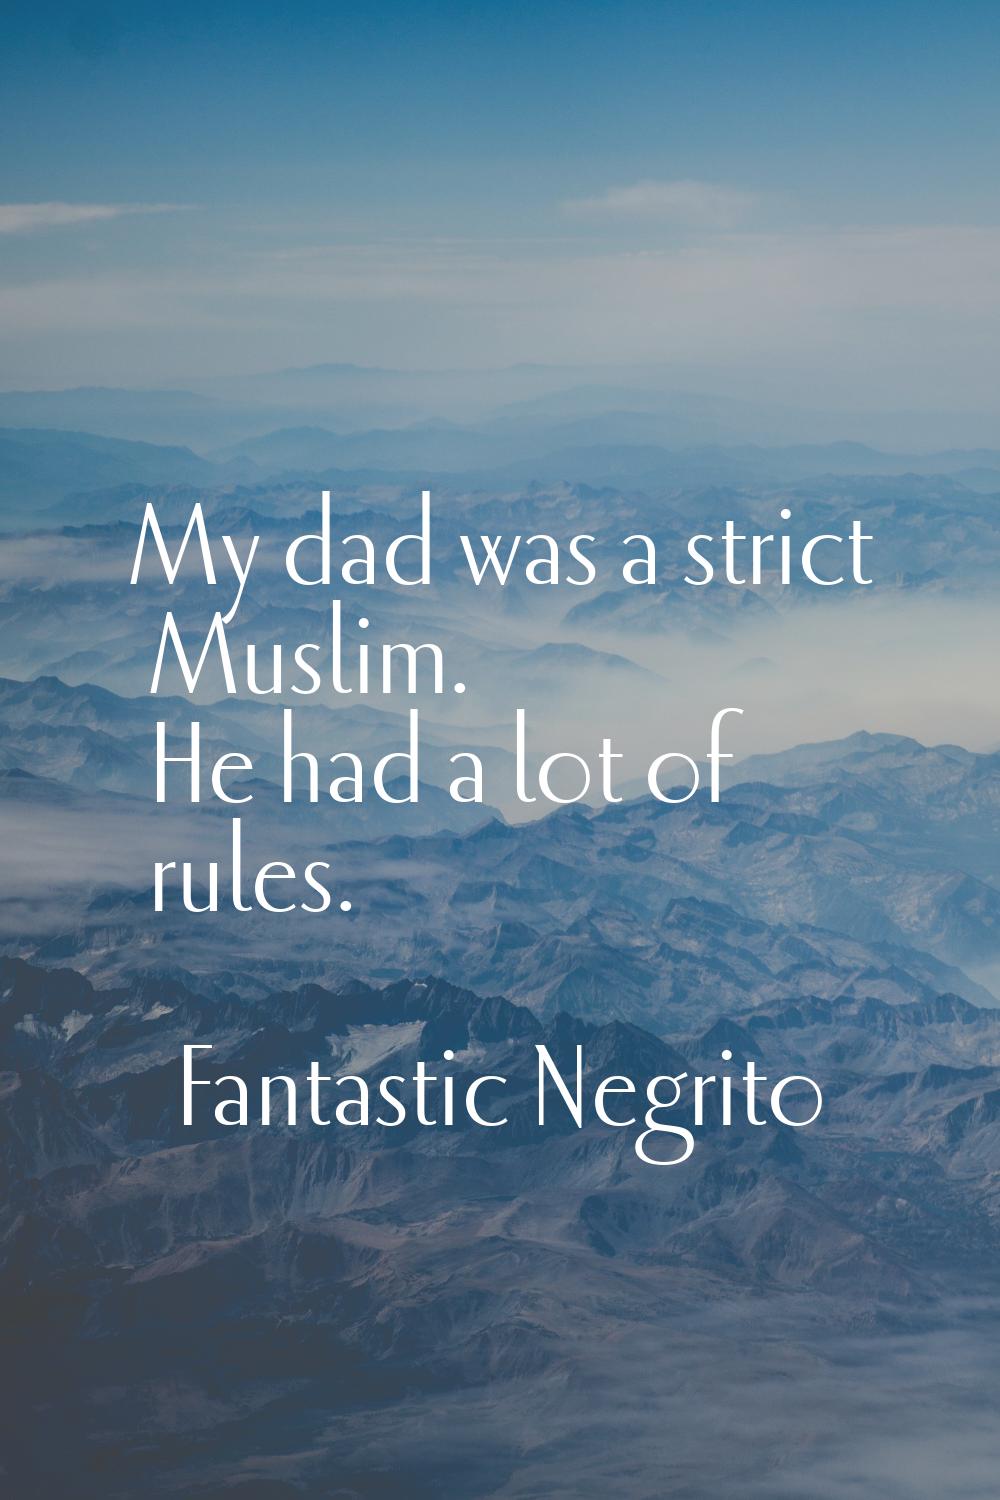 My dad was a strict Muslim. He had a lot of rules.